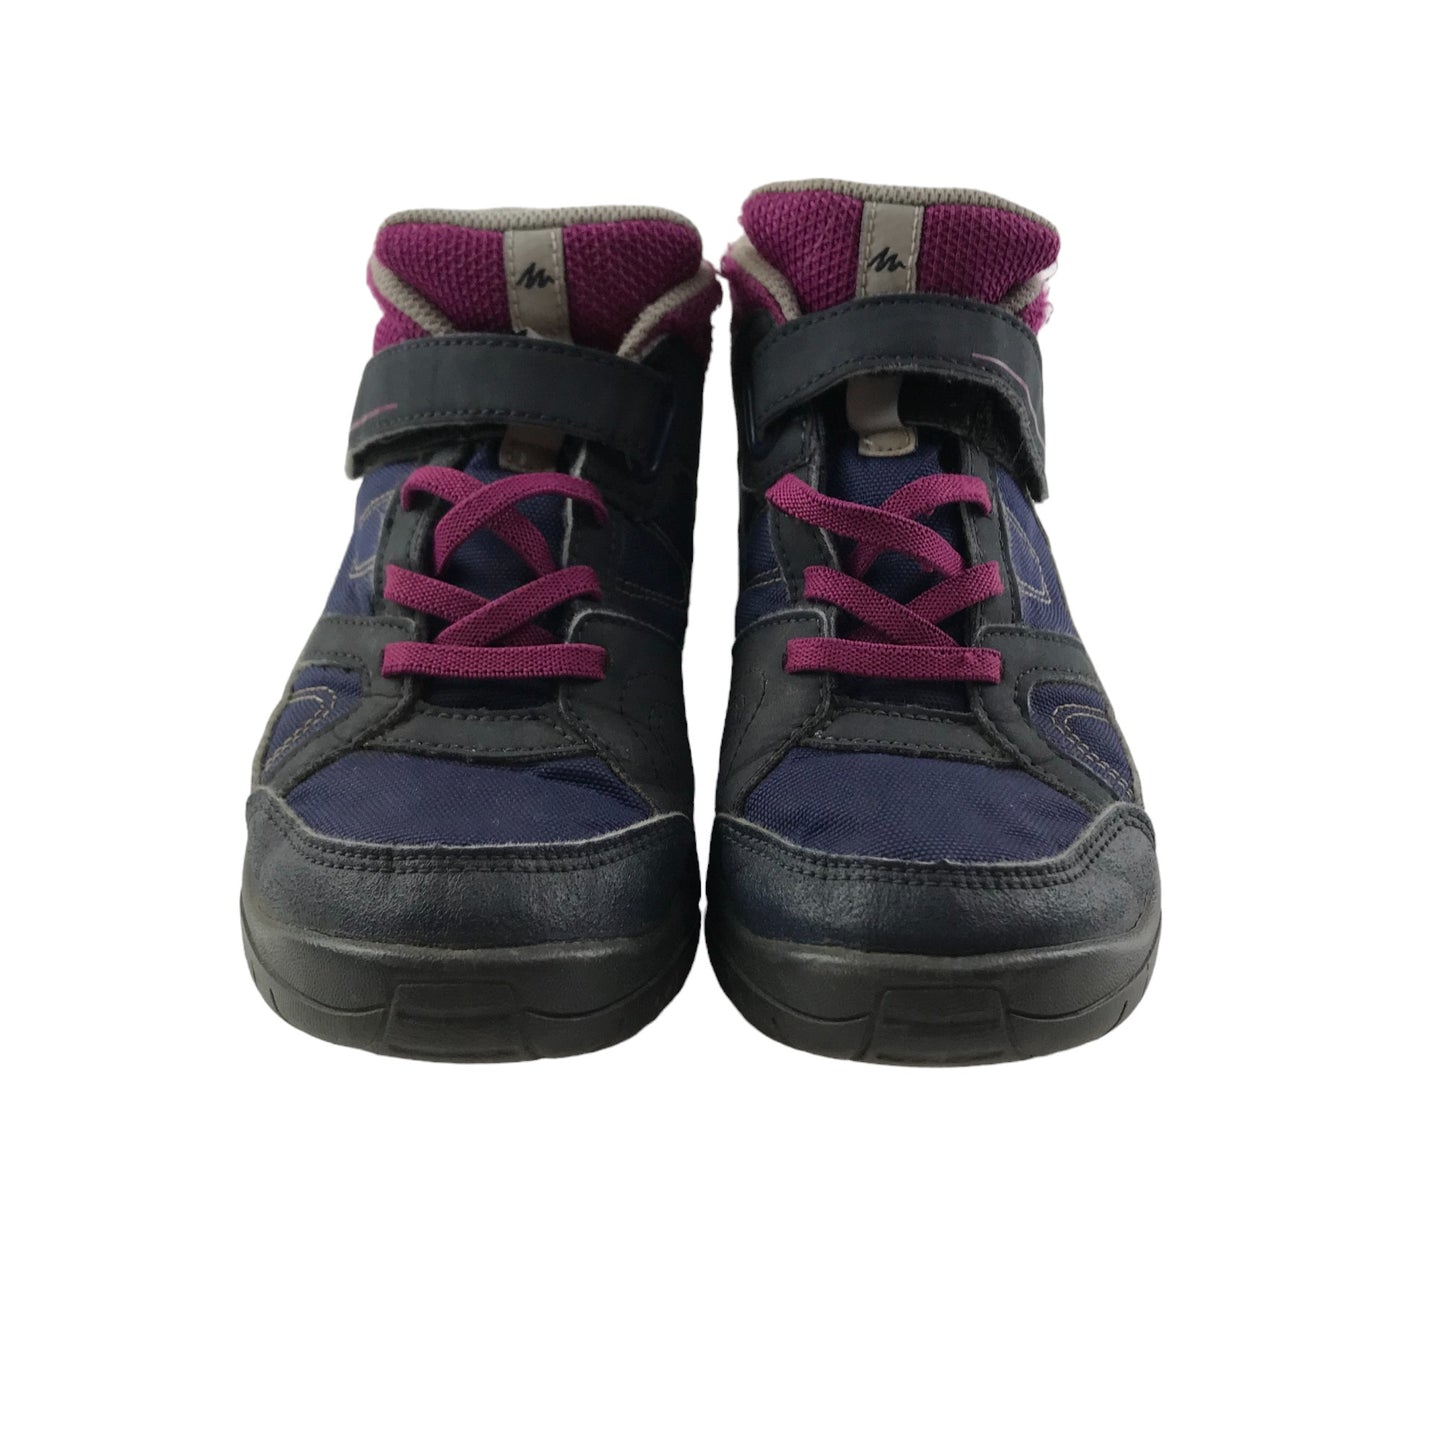 Decathlon Walking Boots Shoe Size 1.5 Grey Navy and Purple with Laces